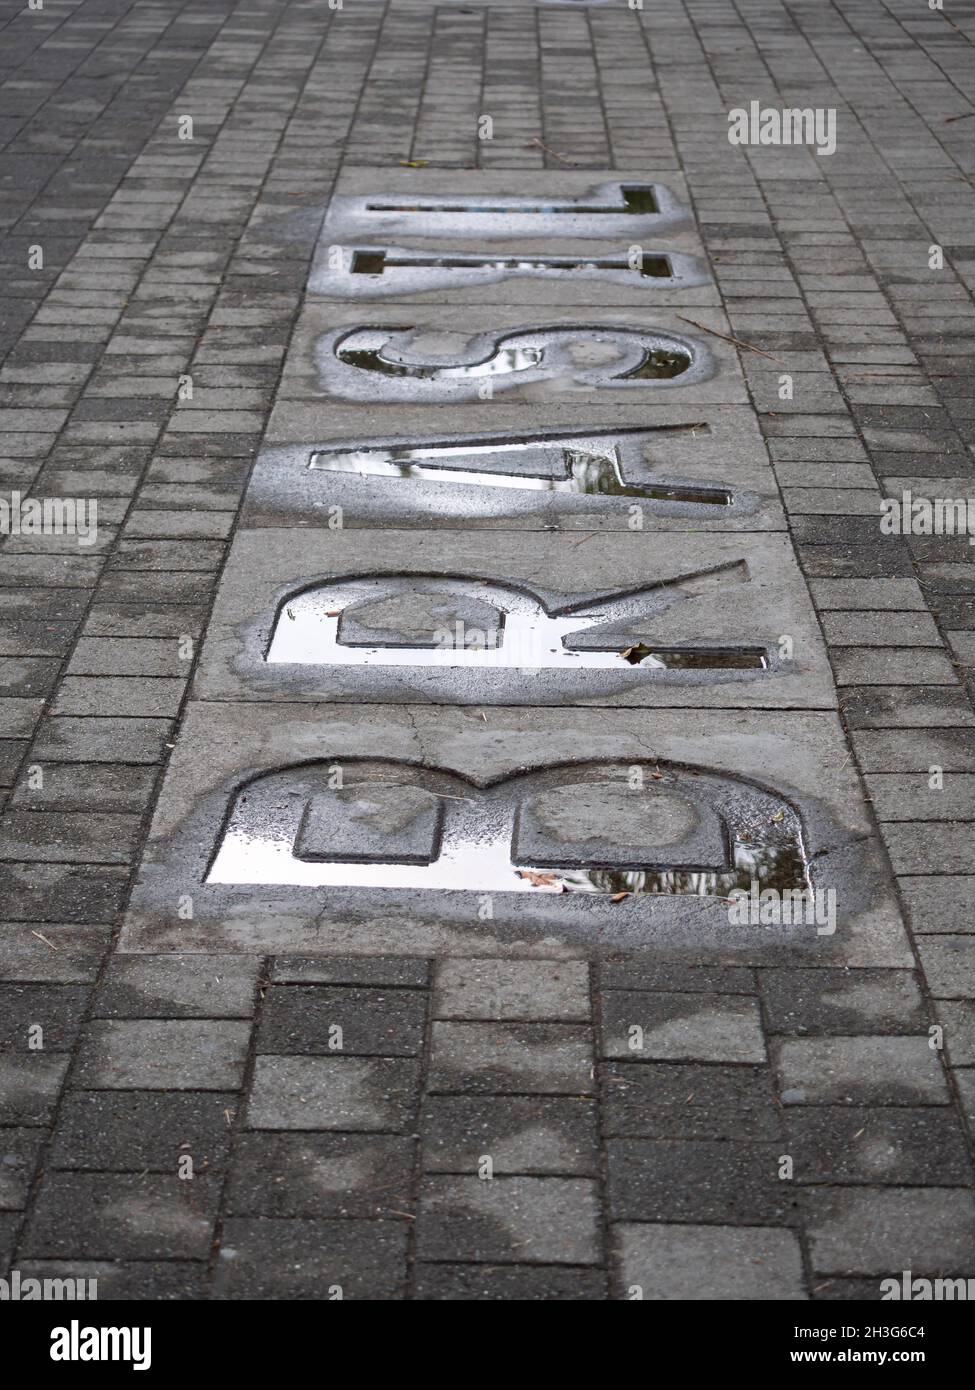 Brasil, Country Name Written in Large Letters on a Wet Cement Floor in a Public Park Stock Photo